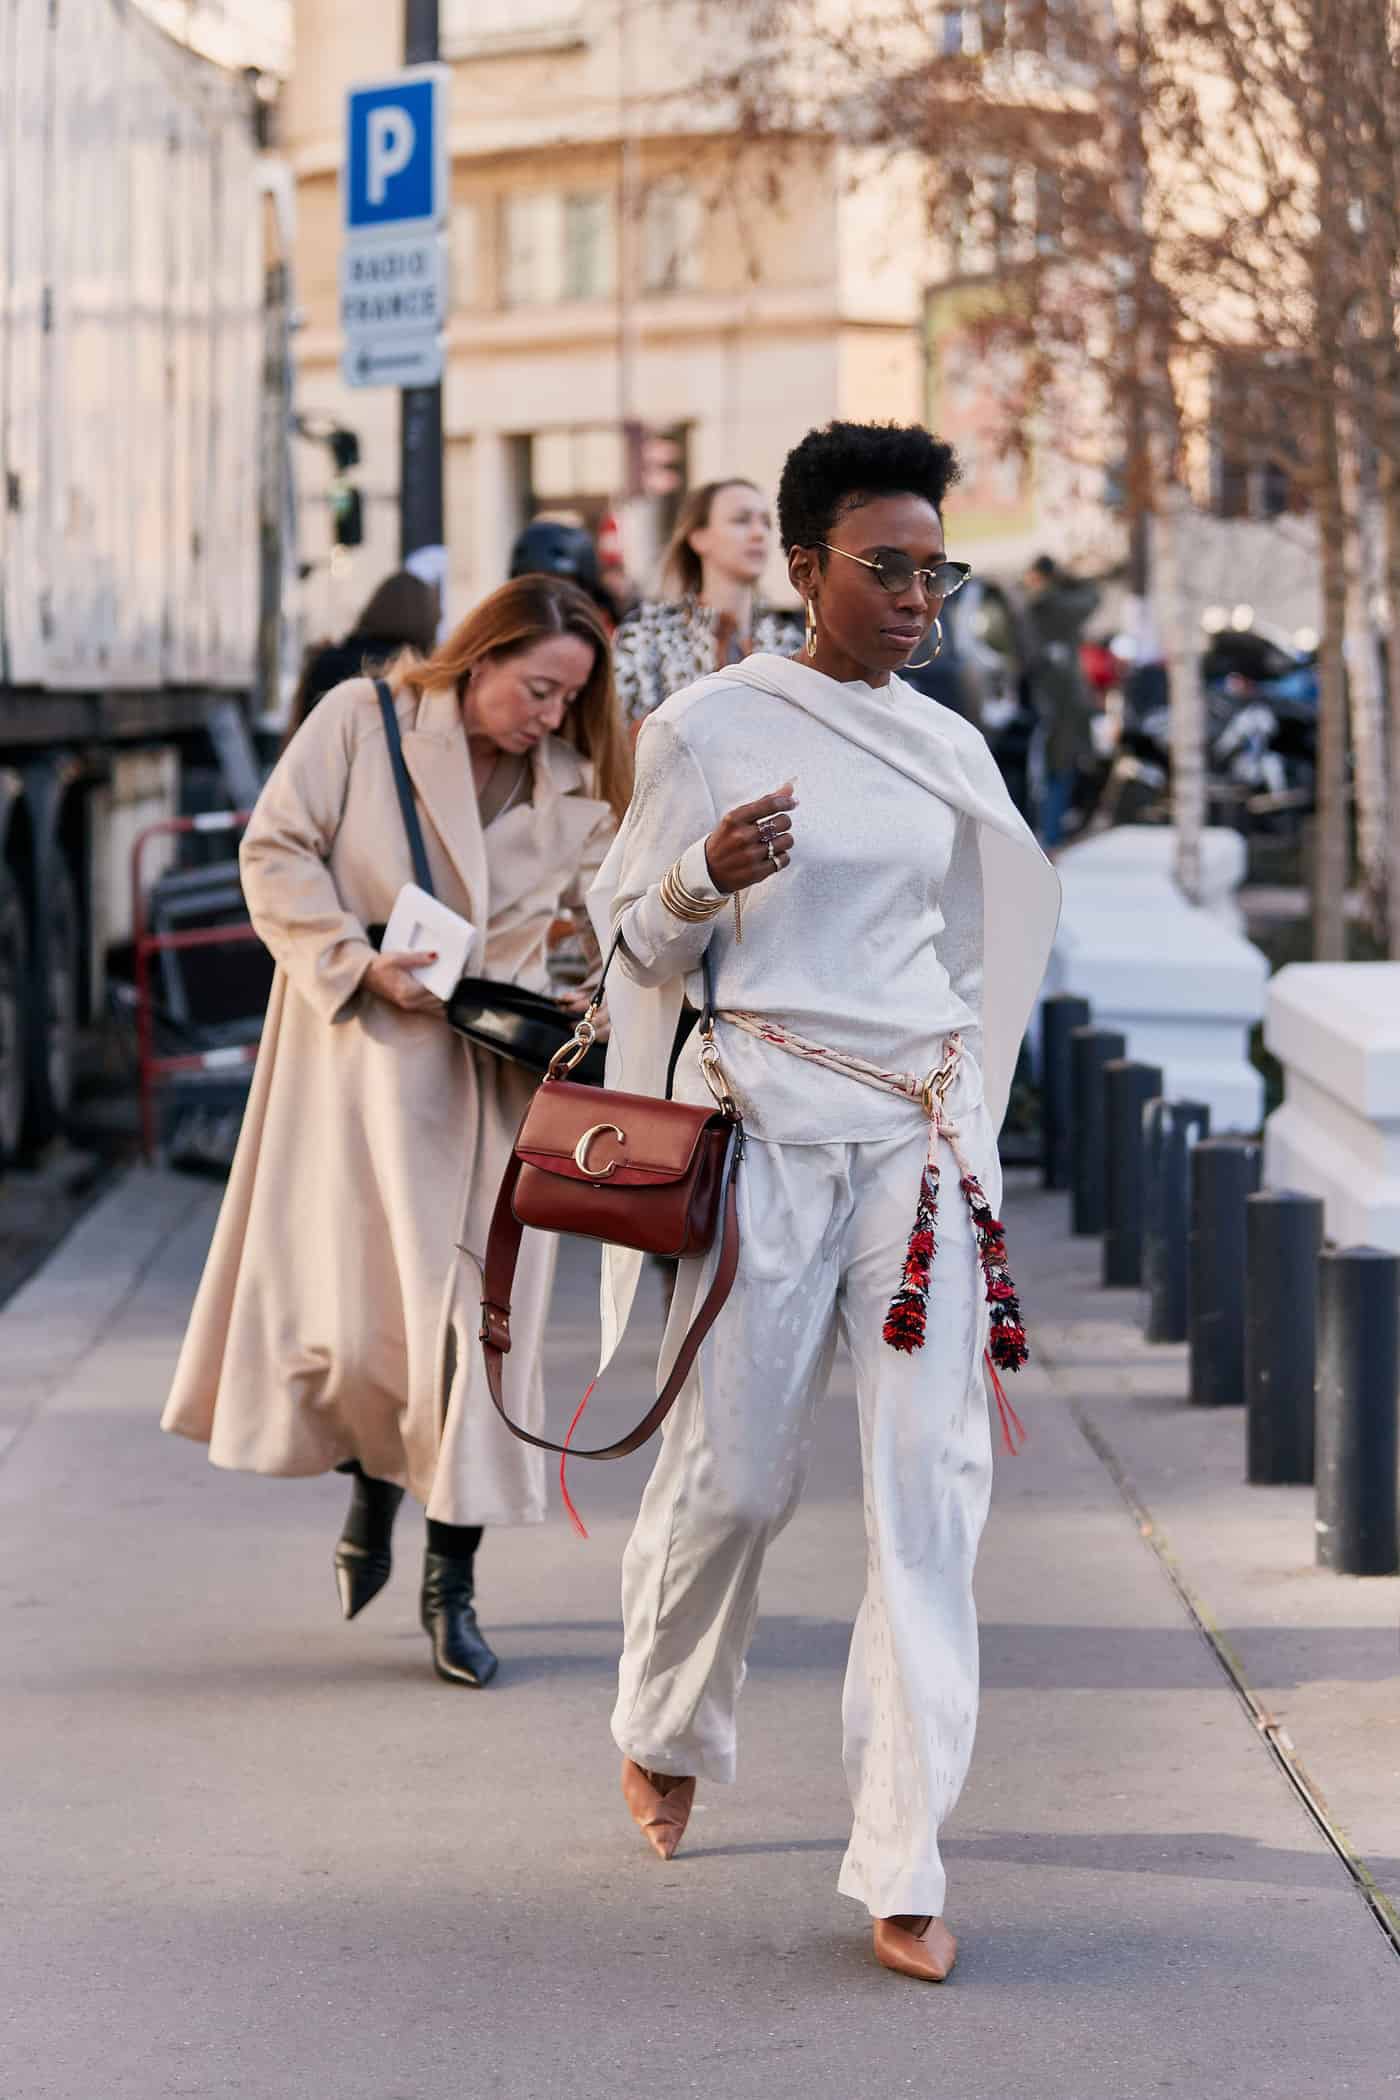 The 9 Best Chloé Bags Every Fashion Person Wants to Carry